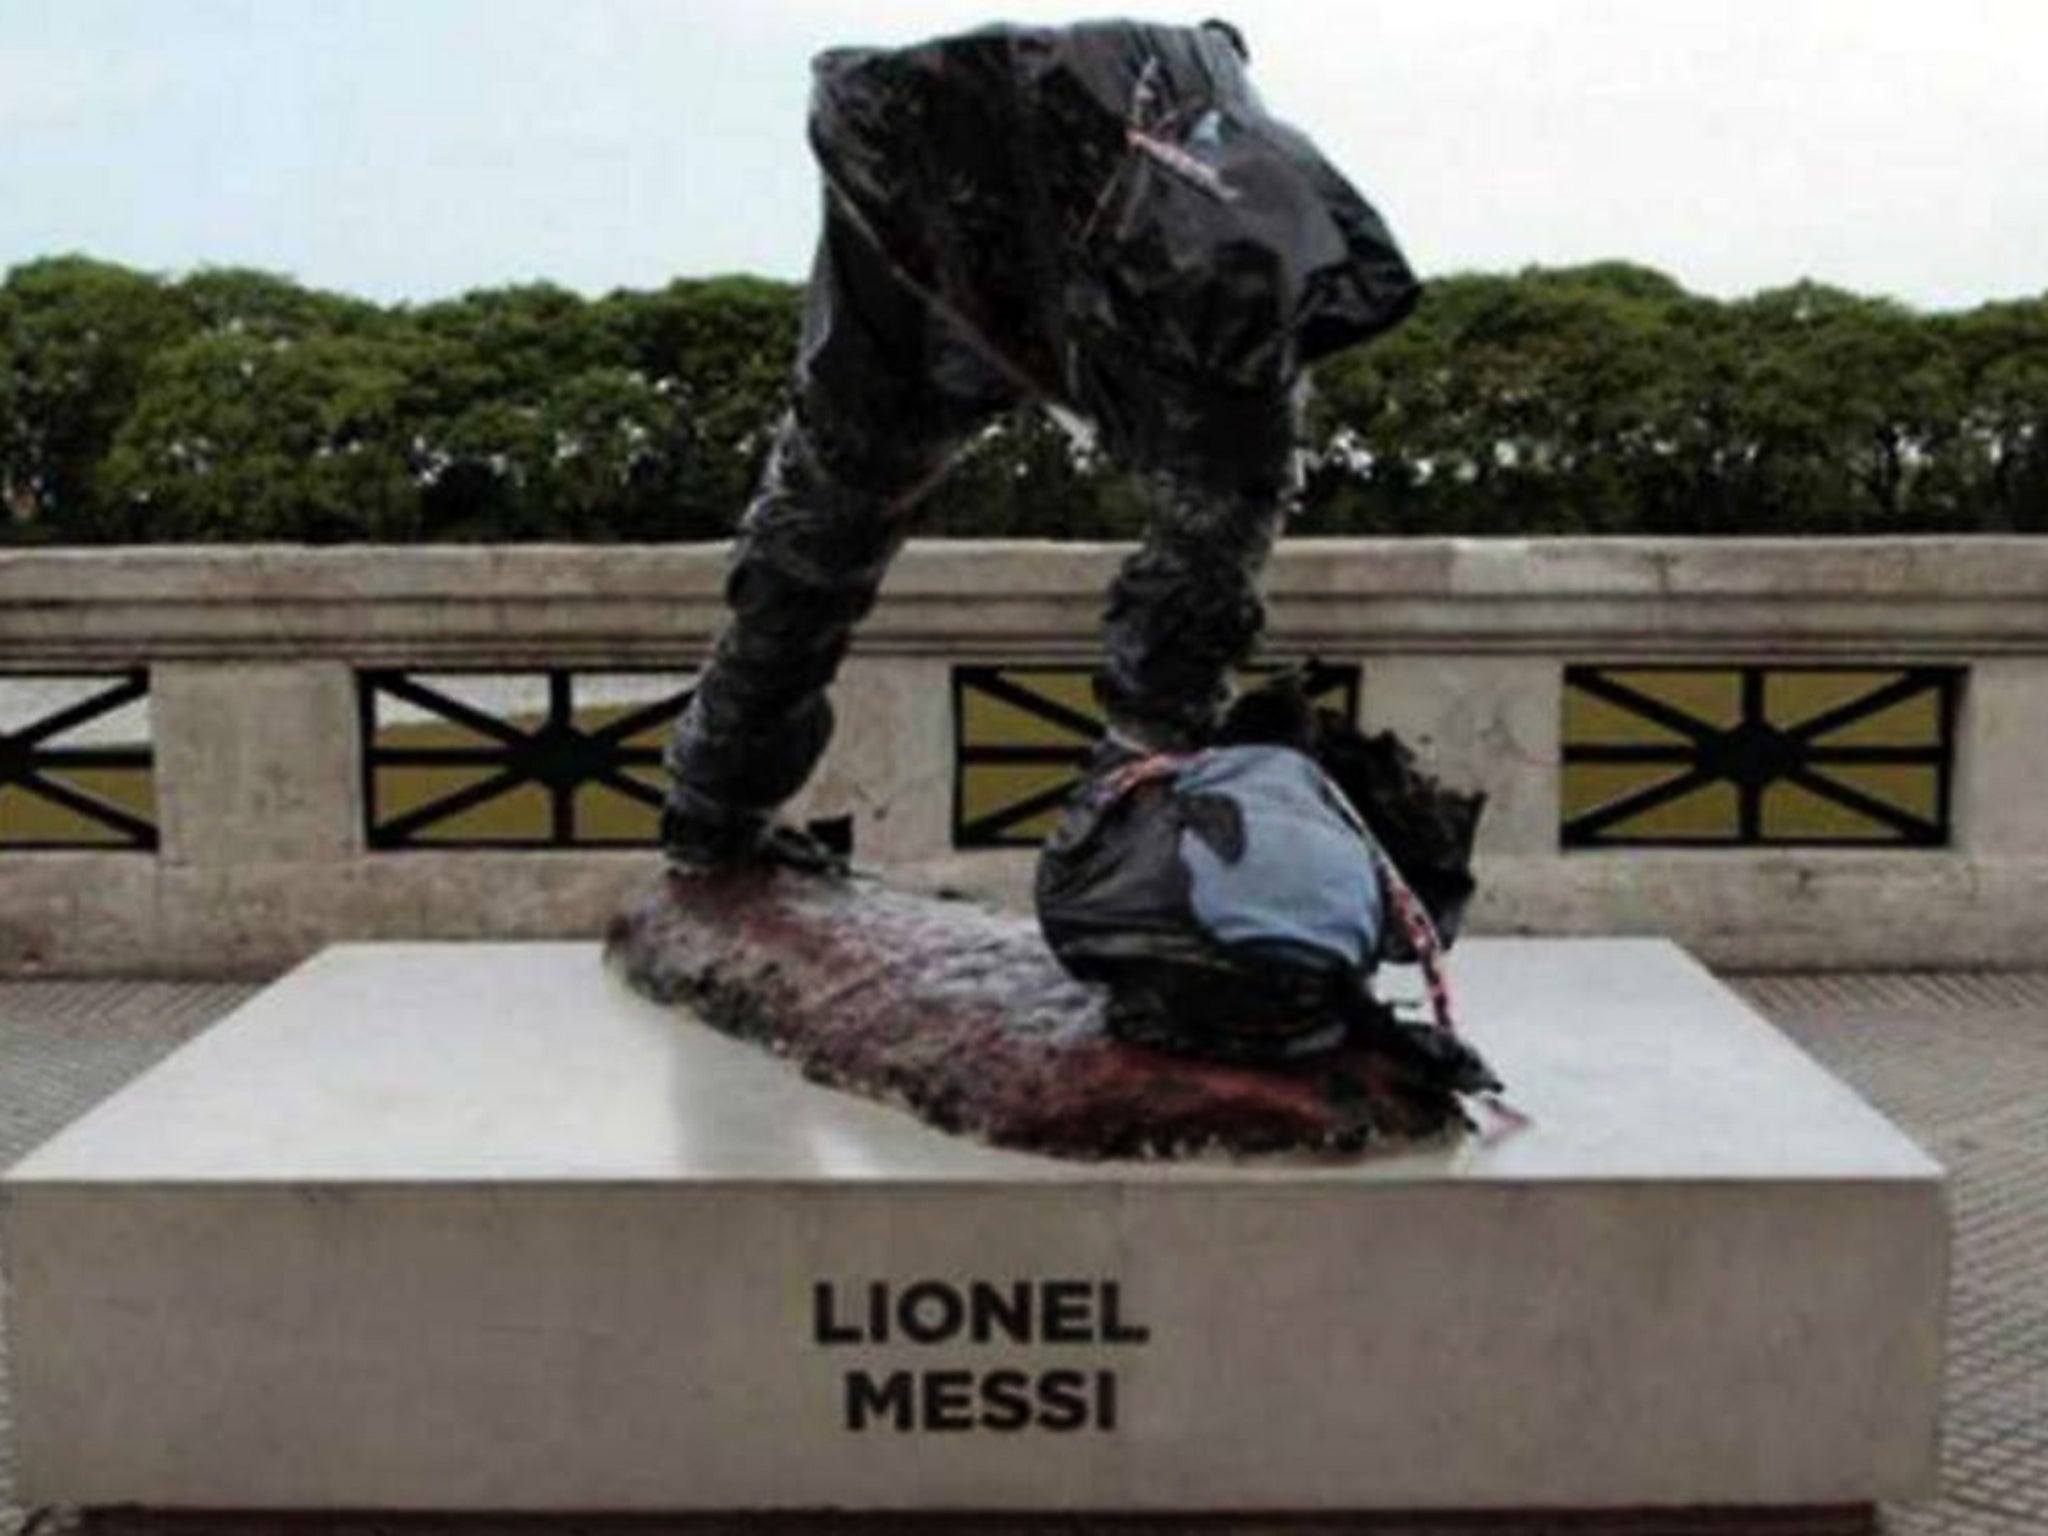 The statue of Lionel Messi after being vandalised